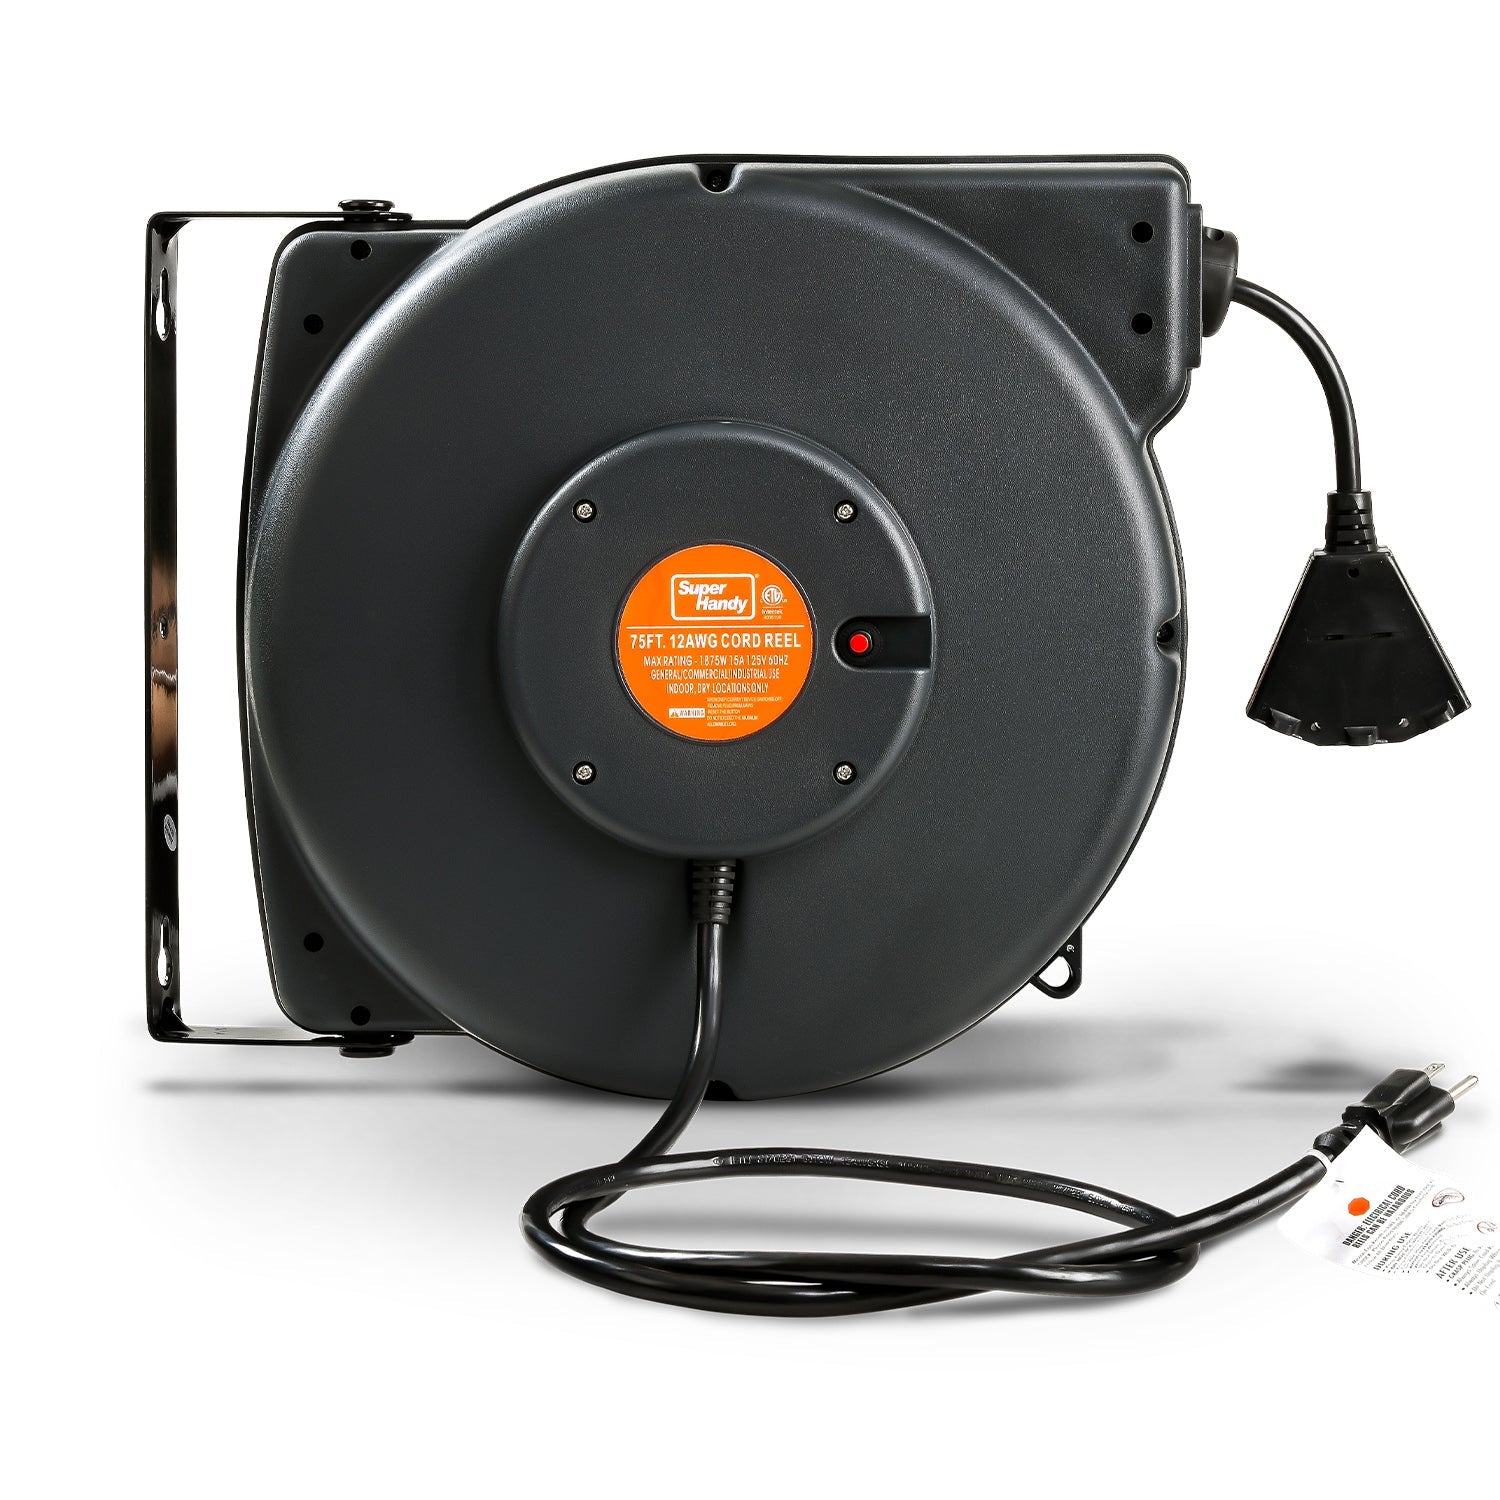 Hand Crank and Electric Power Cord Reels